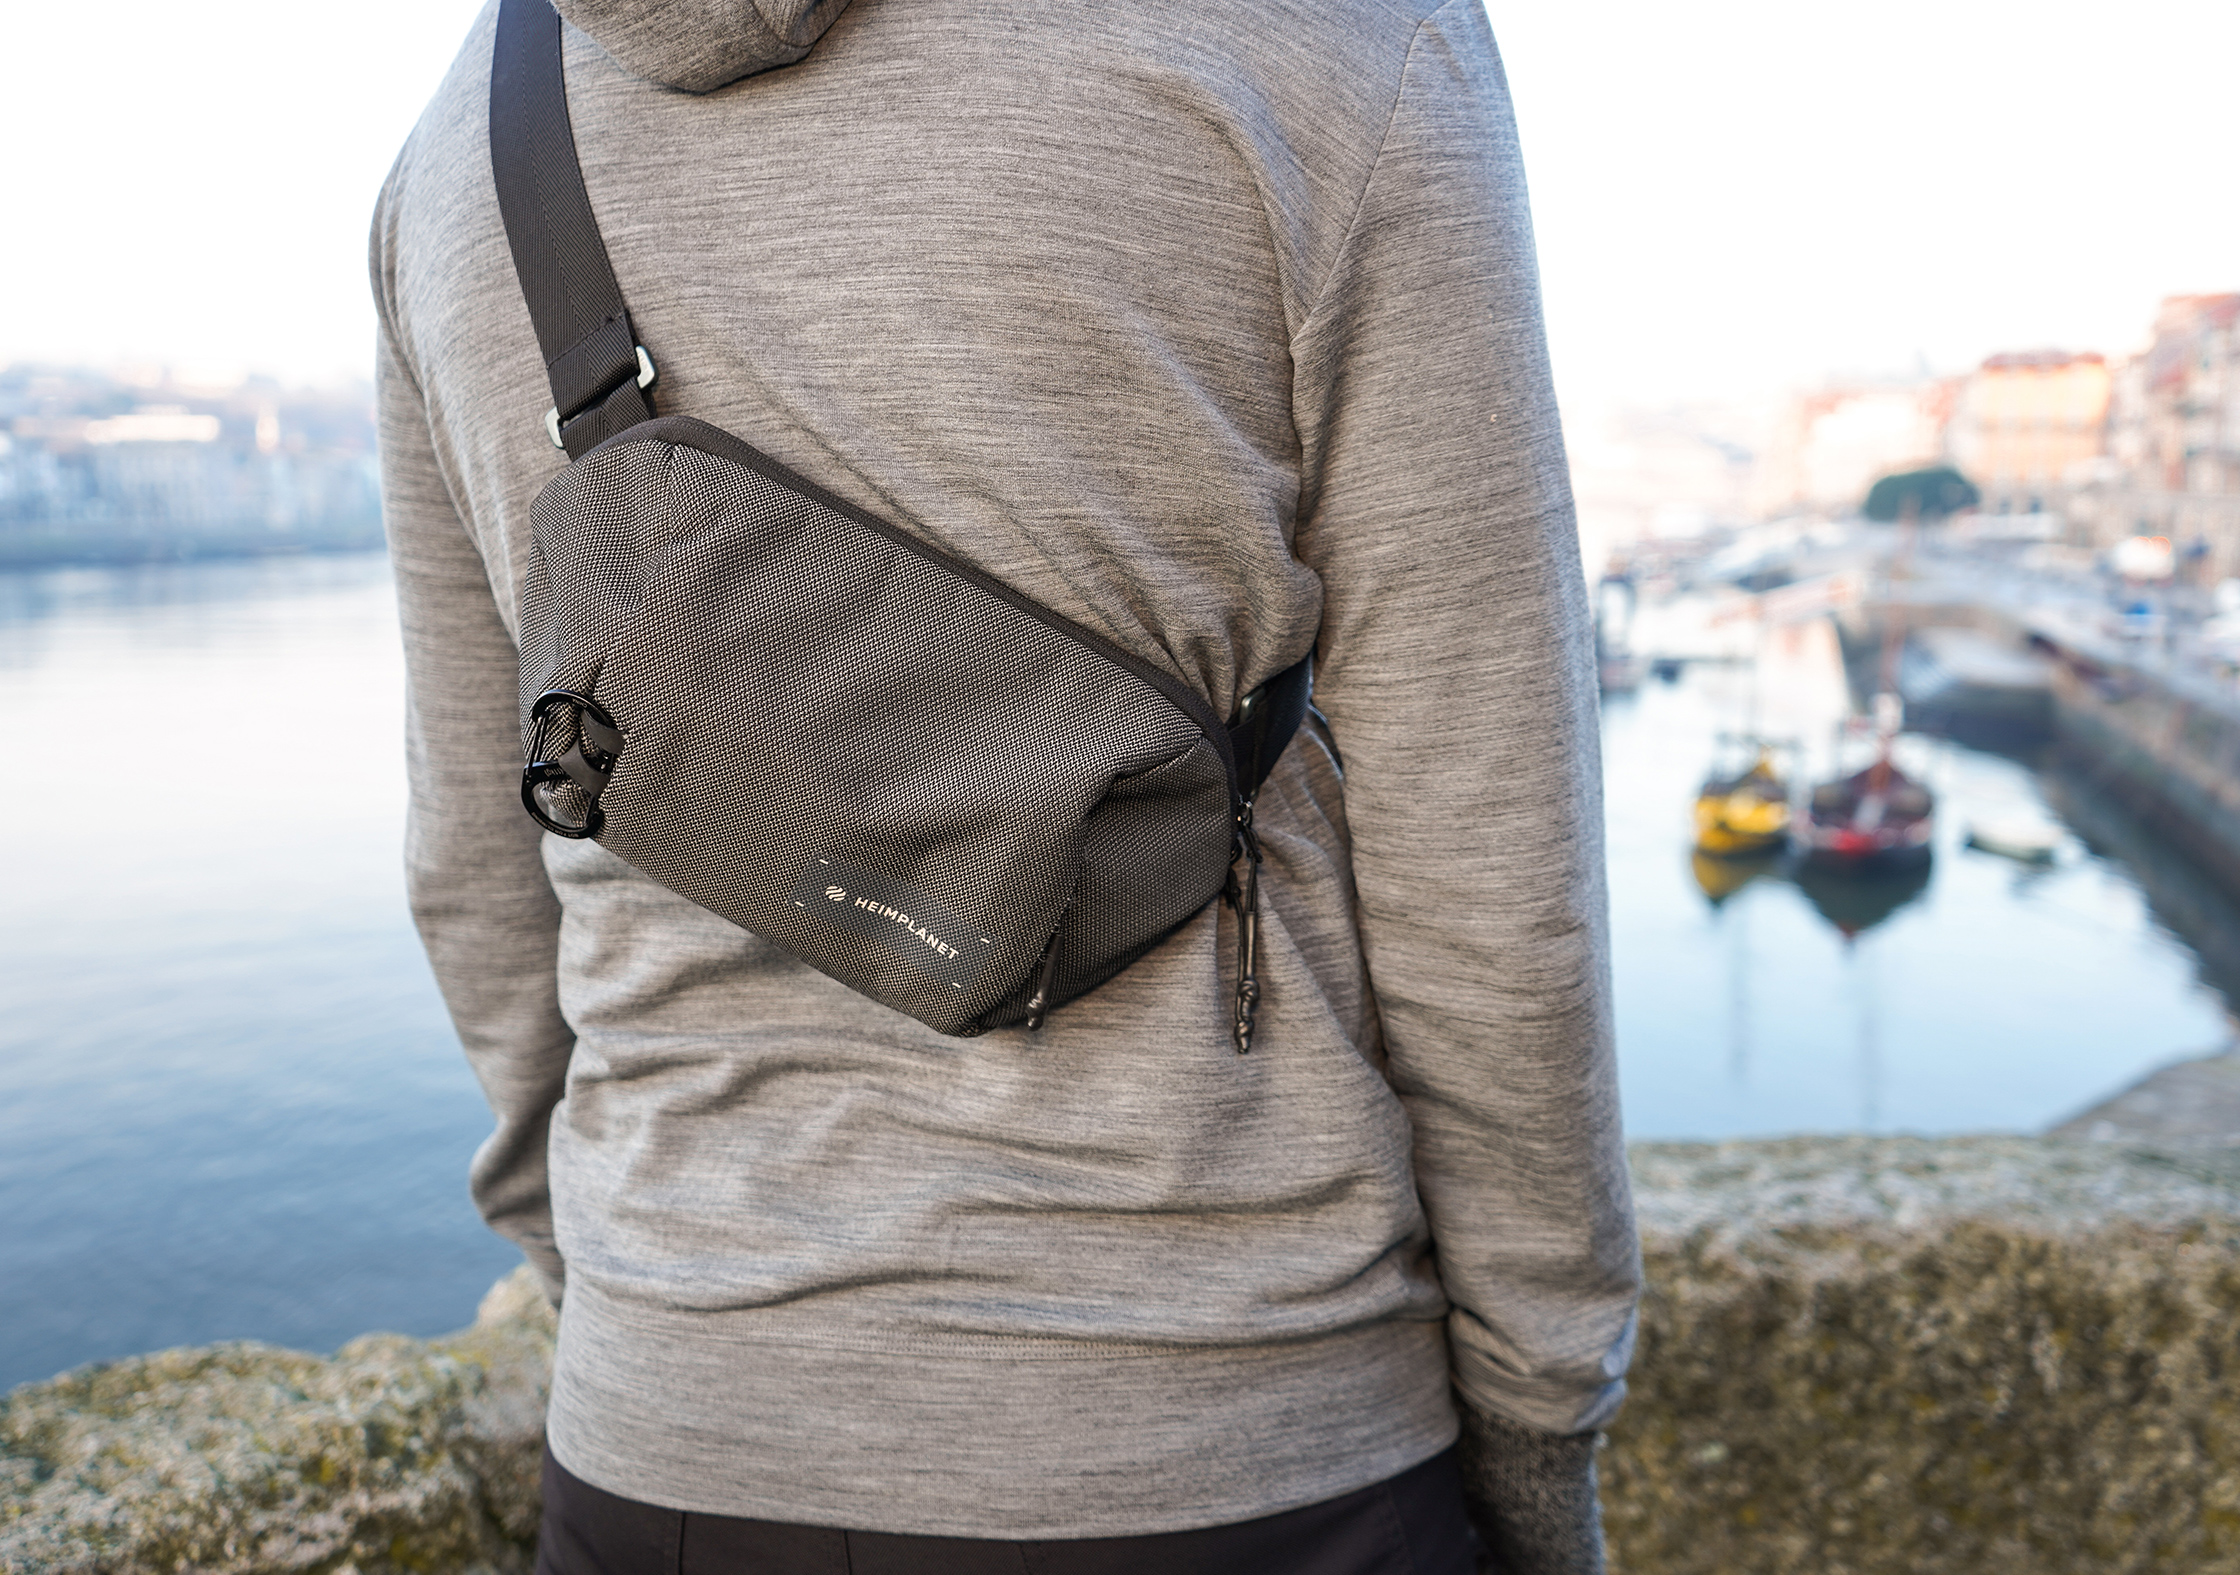 The Best Work Bags For Men 2019 - Forbes Vetted